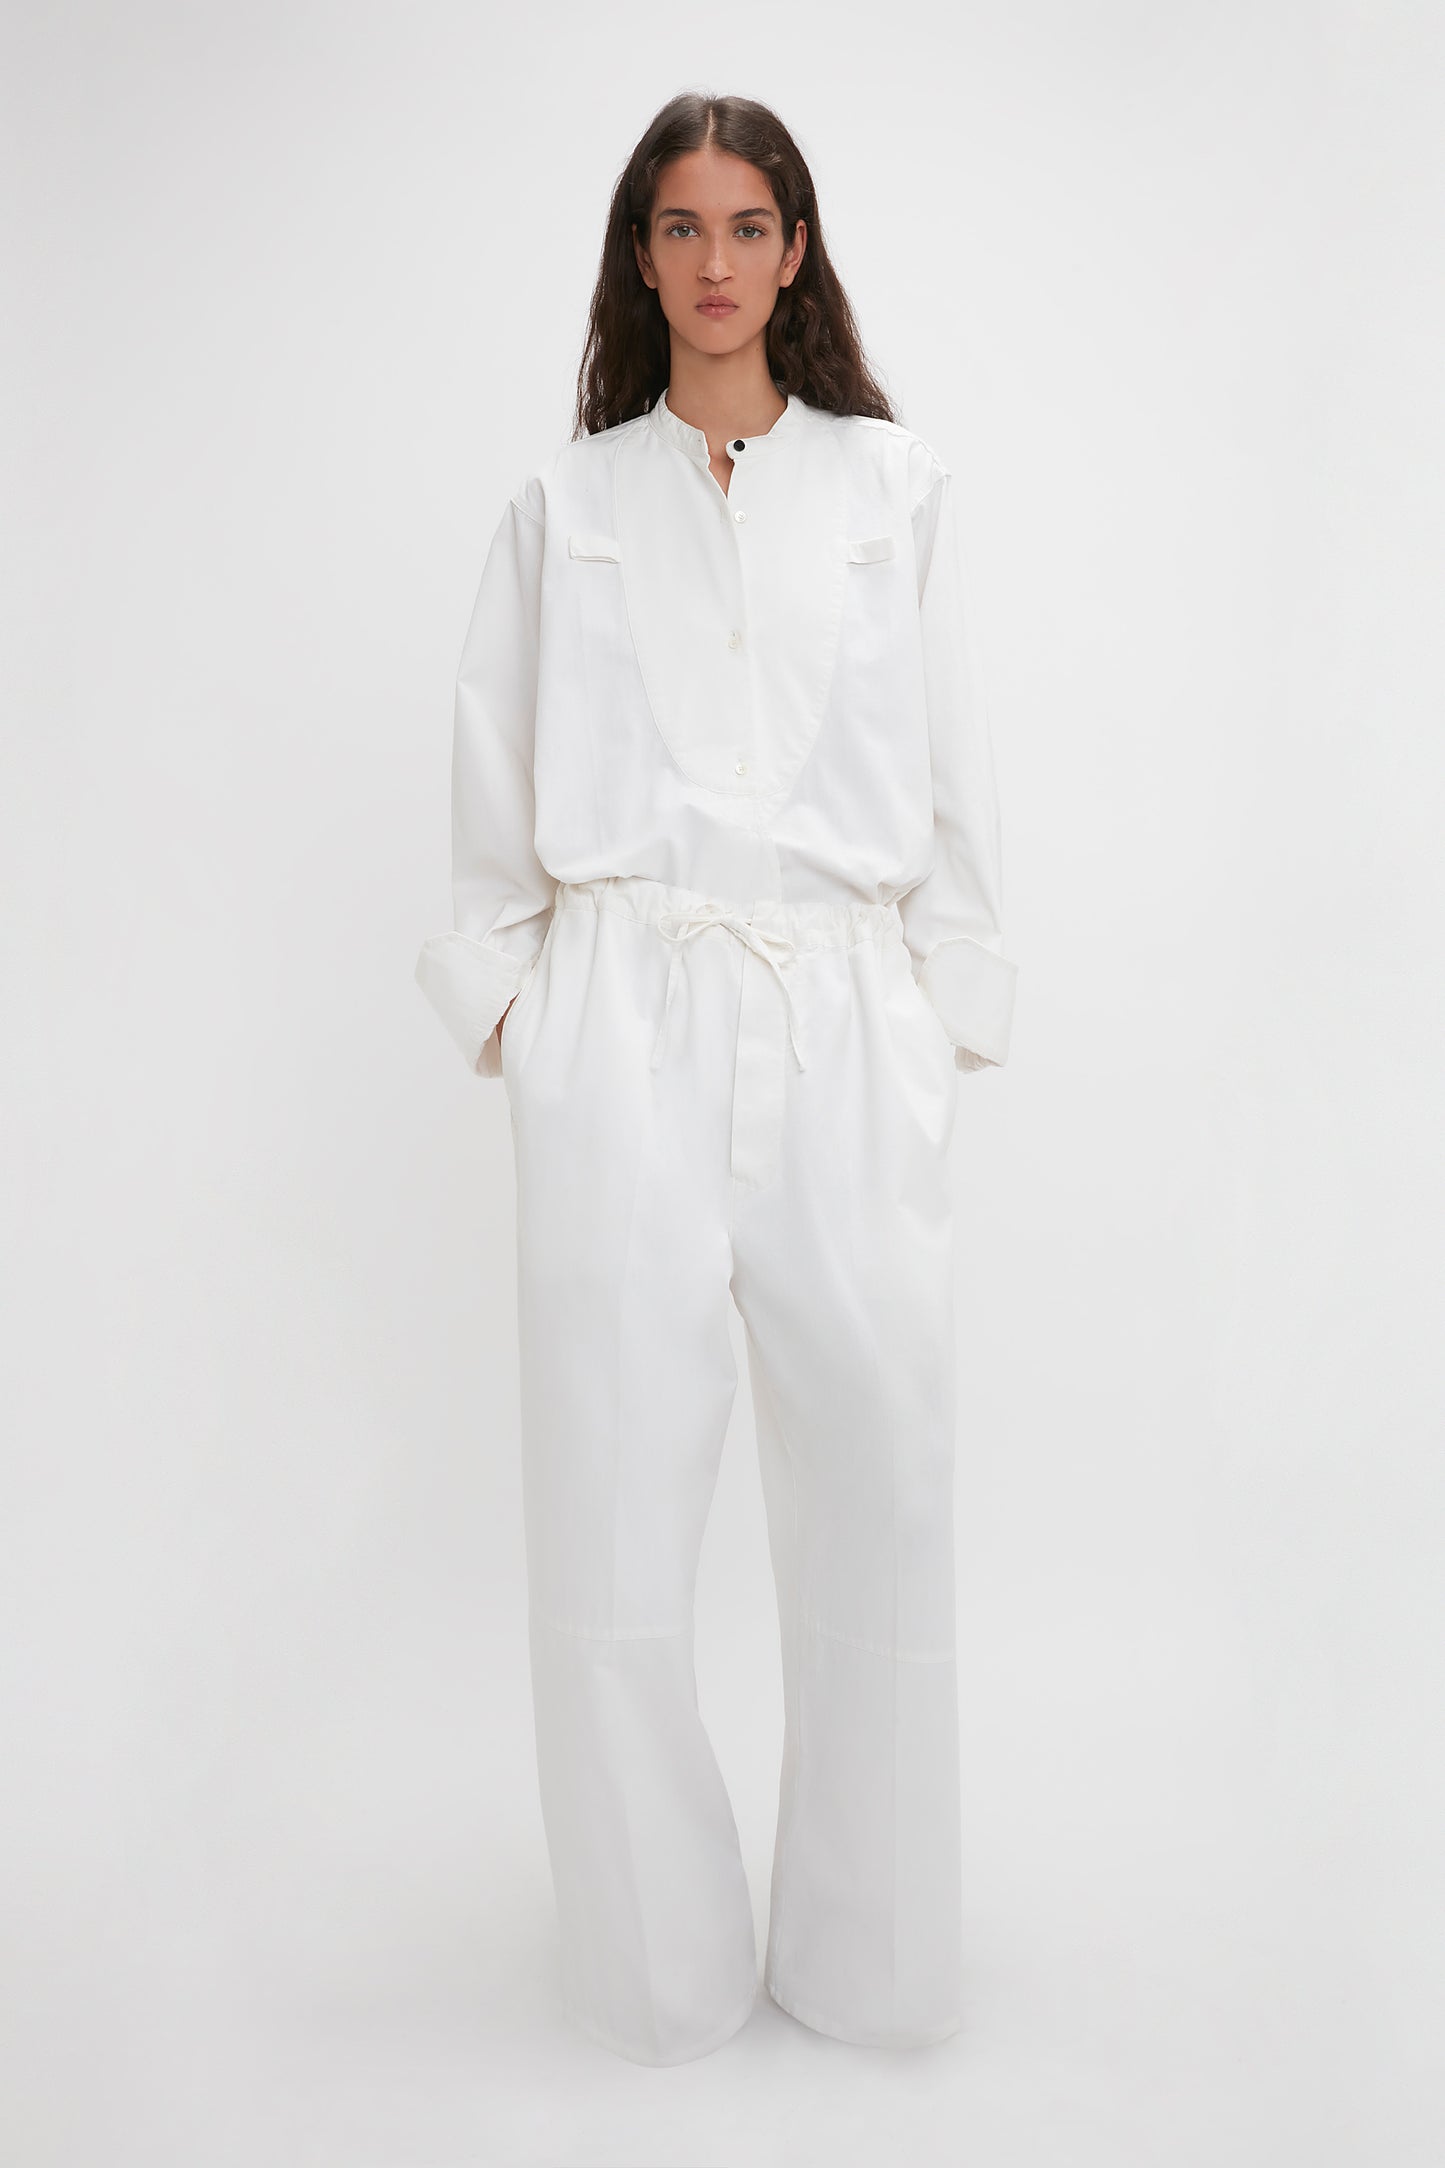 Woman wearing Victoria Beckham's Drawstring Pyjama Trouser In Washed White with cuffed sleeves and high-waisted, wide-leg trousers, standing against a plain background.